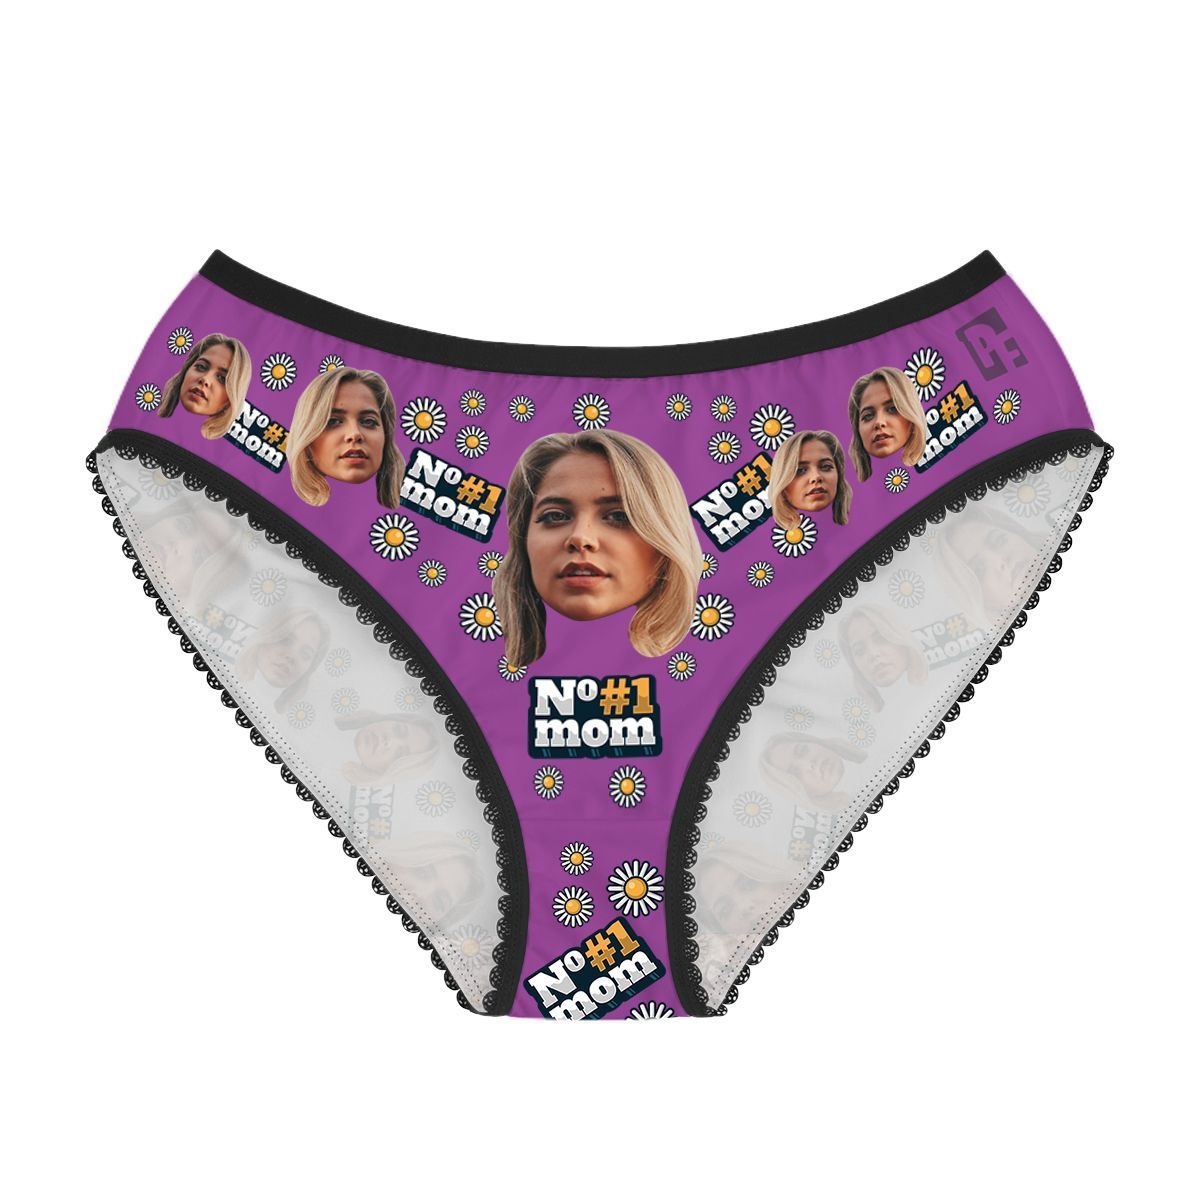 Purple #1 Mom women's underwear briefs personalized with photo printed on them